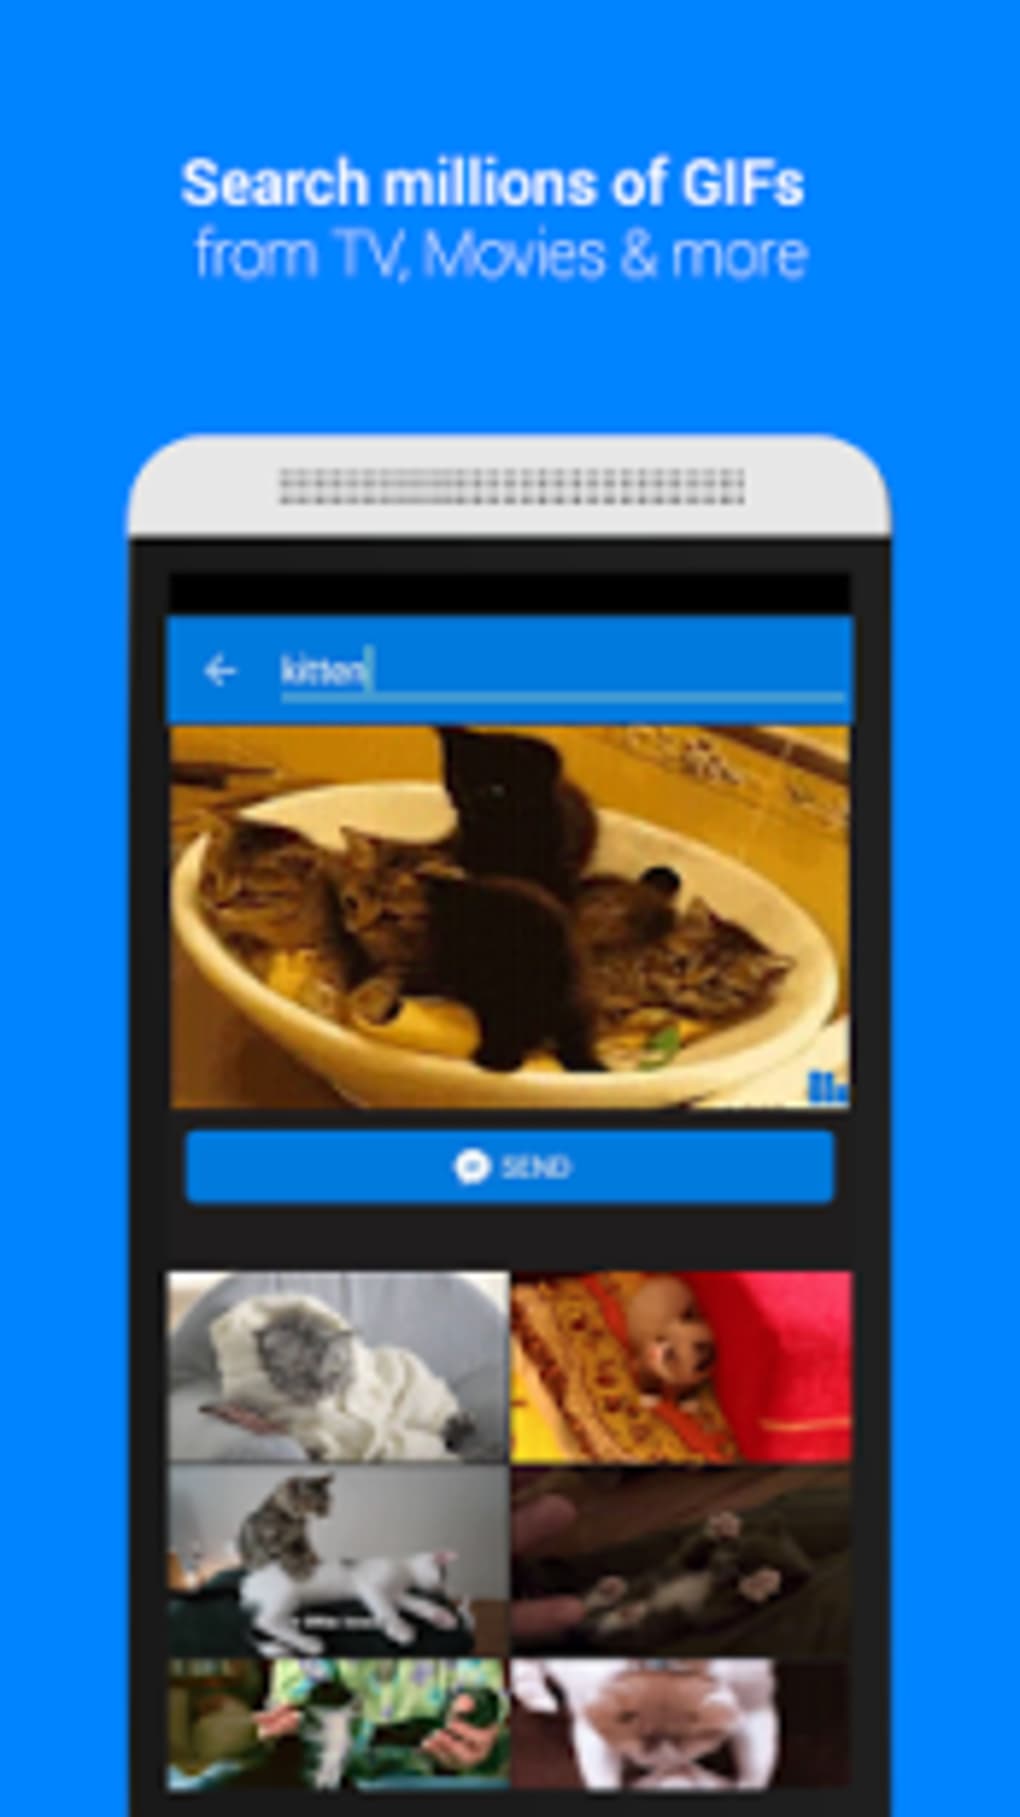 gif keyboard for android text